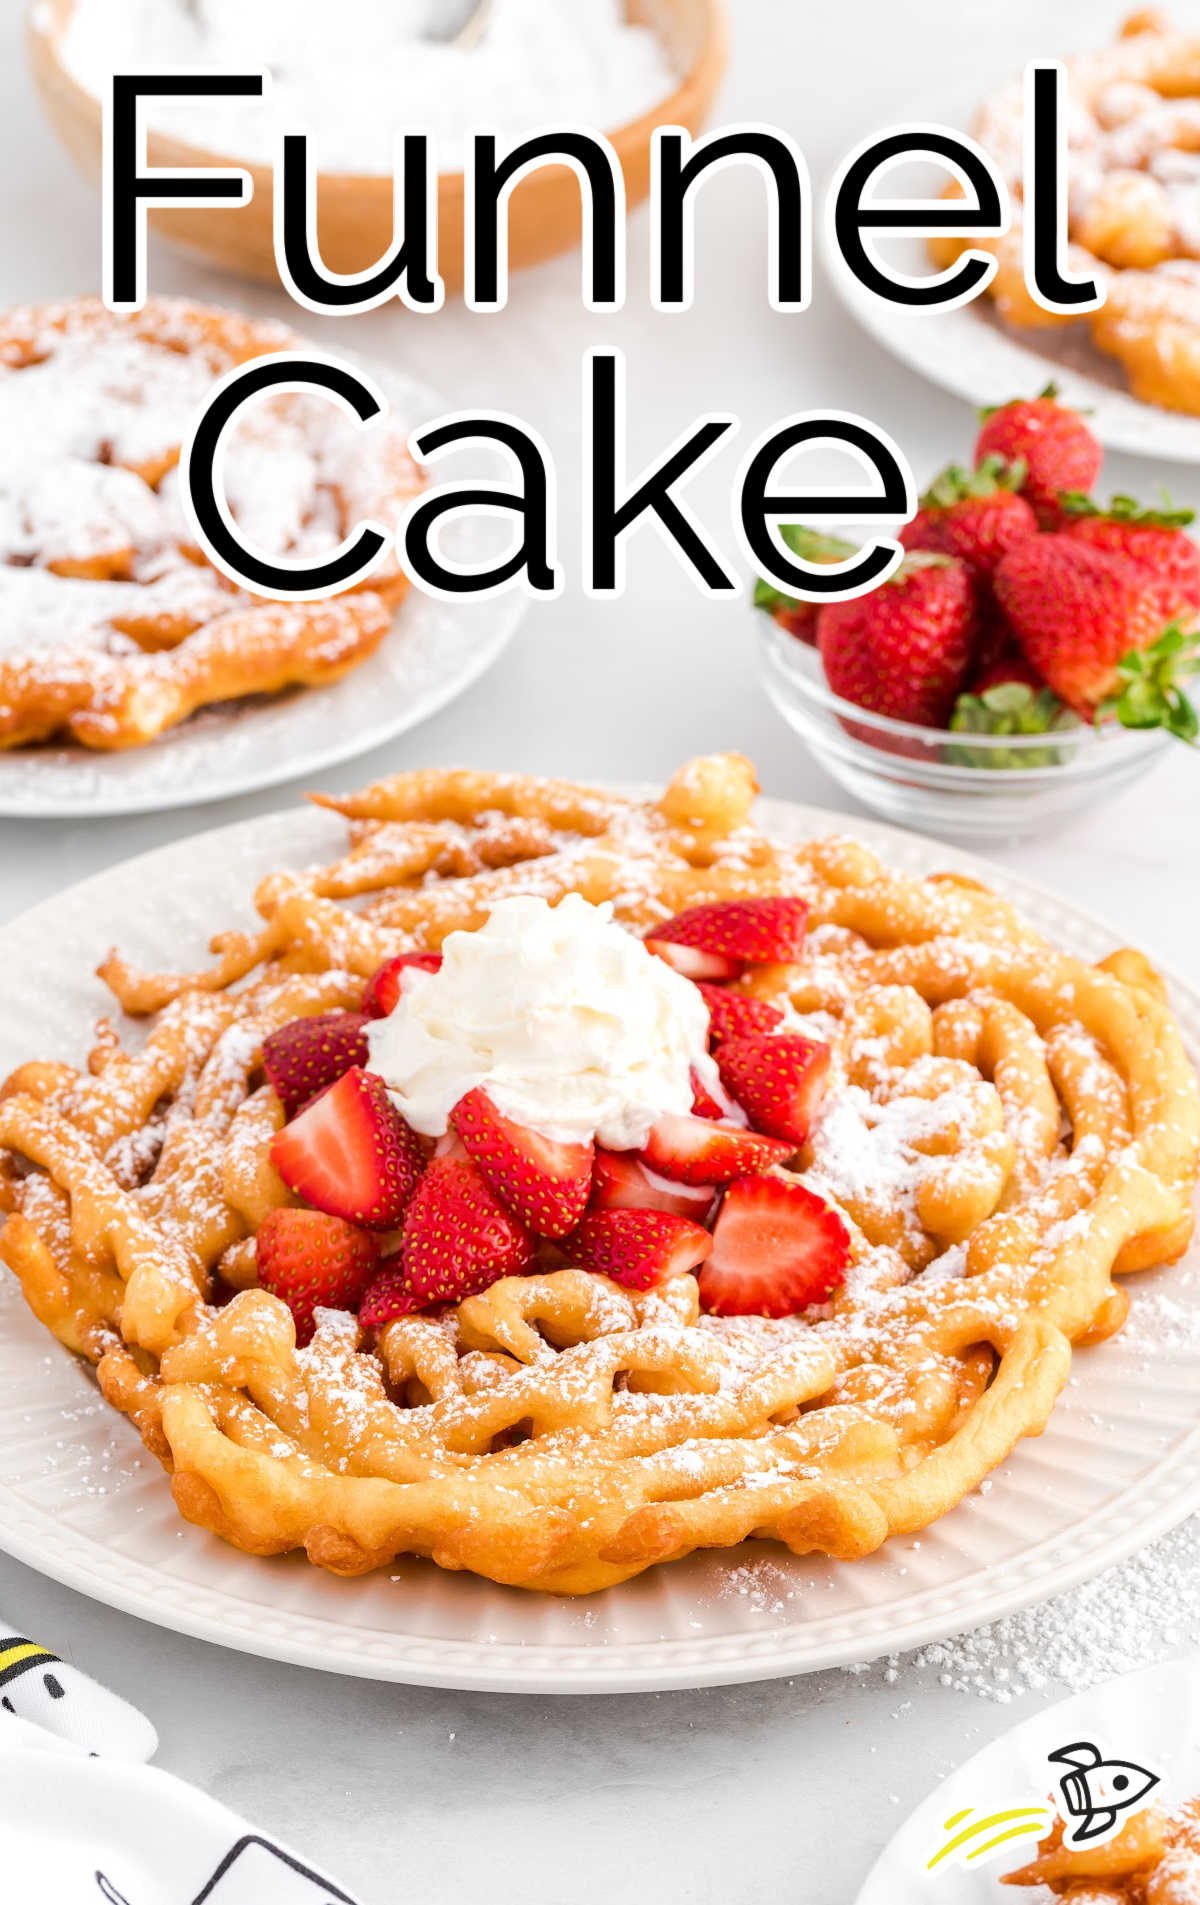 Funnel Cake topped with strawberries, powdered sugar, and whip cream on a plate